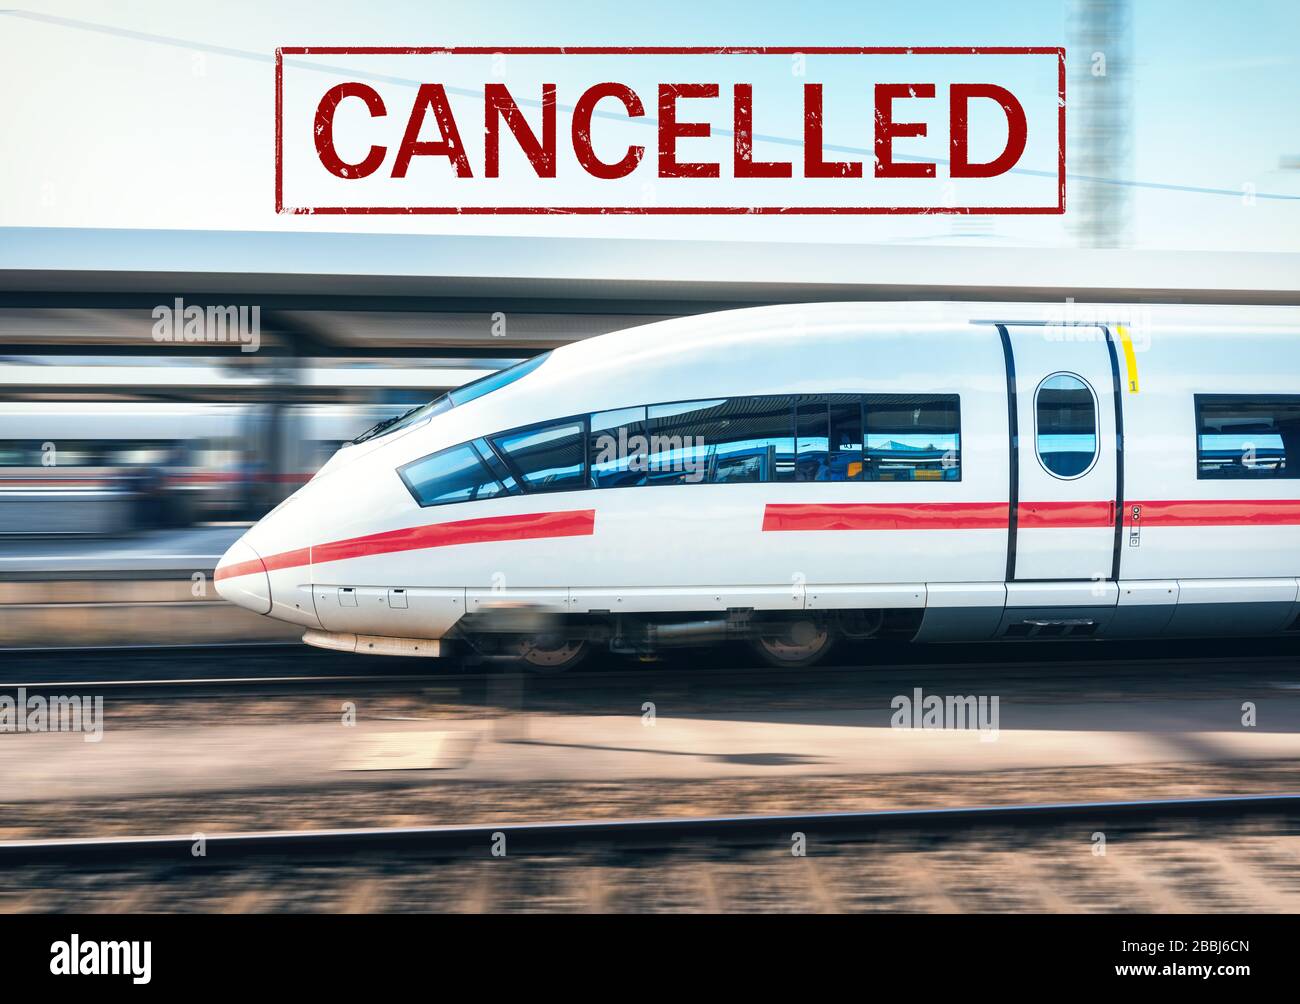 Trains cancelled due to pandemic of coronavirus Stock Photo